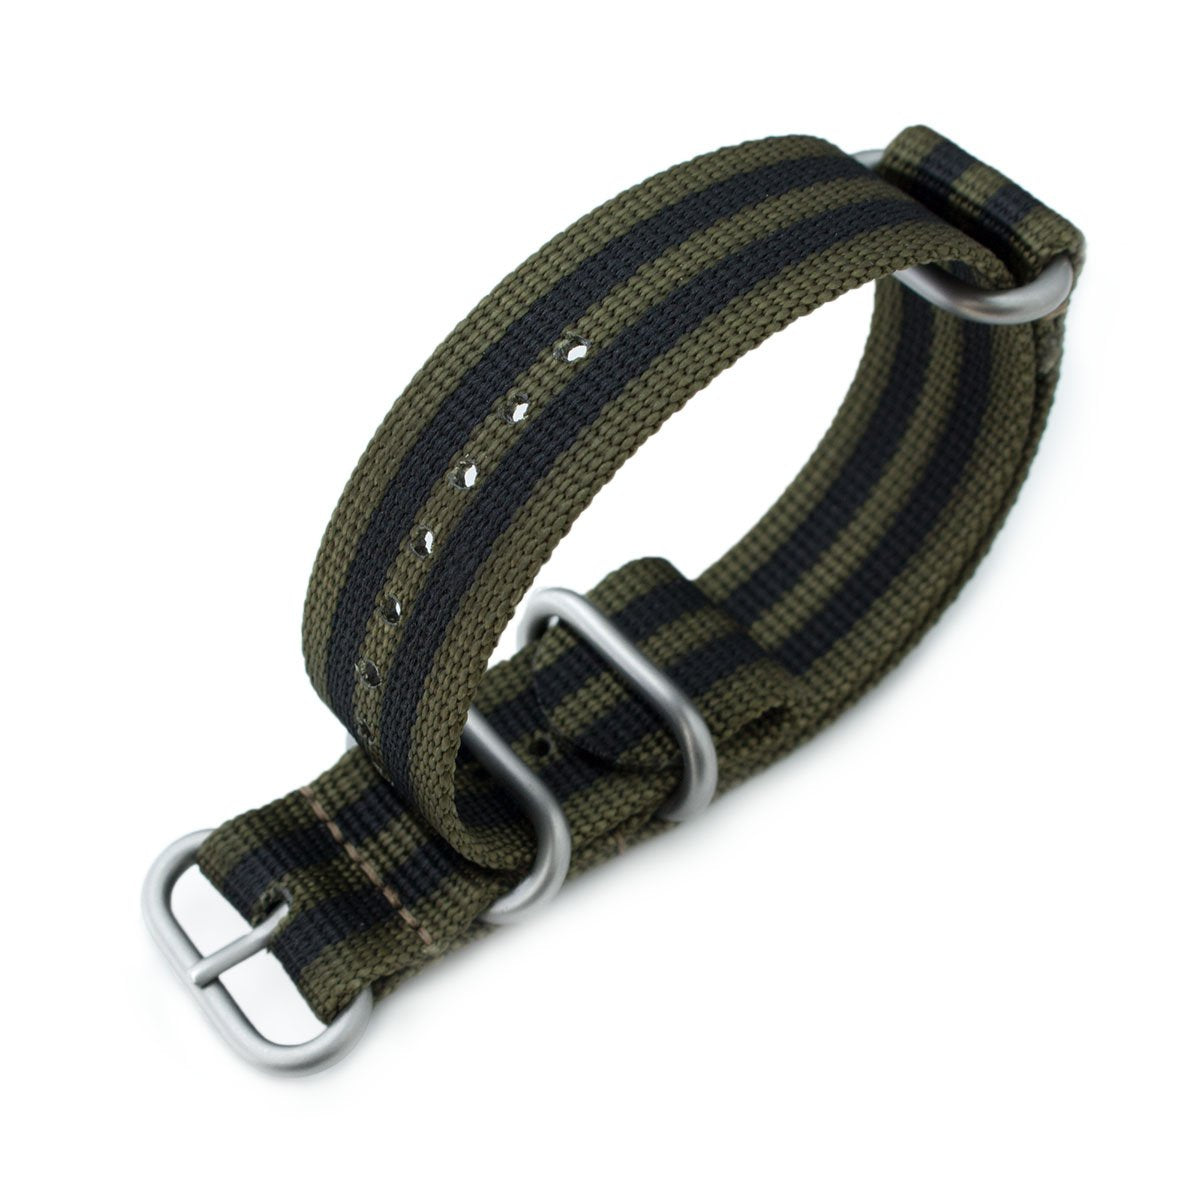 MiLTAT 22mm or 24mm 3 Rings G10 Zulu Watch Strap Ballistic Nylon Armband Forest Green &amp; Black Stripes Sandblasted Buckle Strapcode Watch Bands